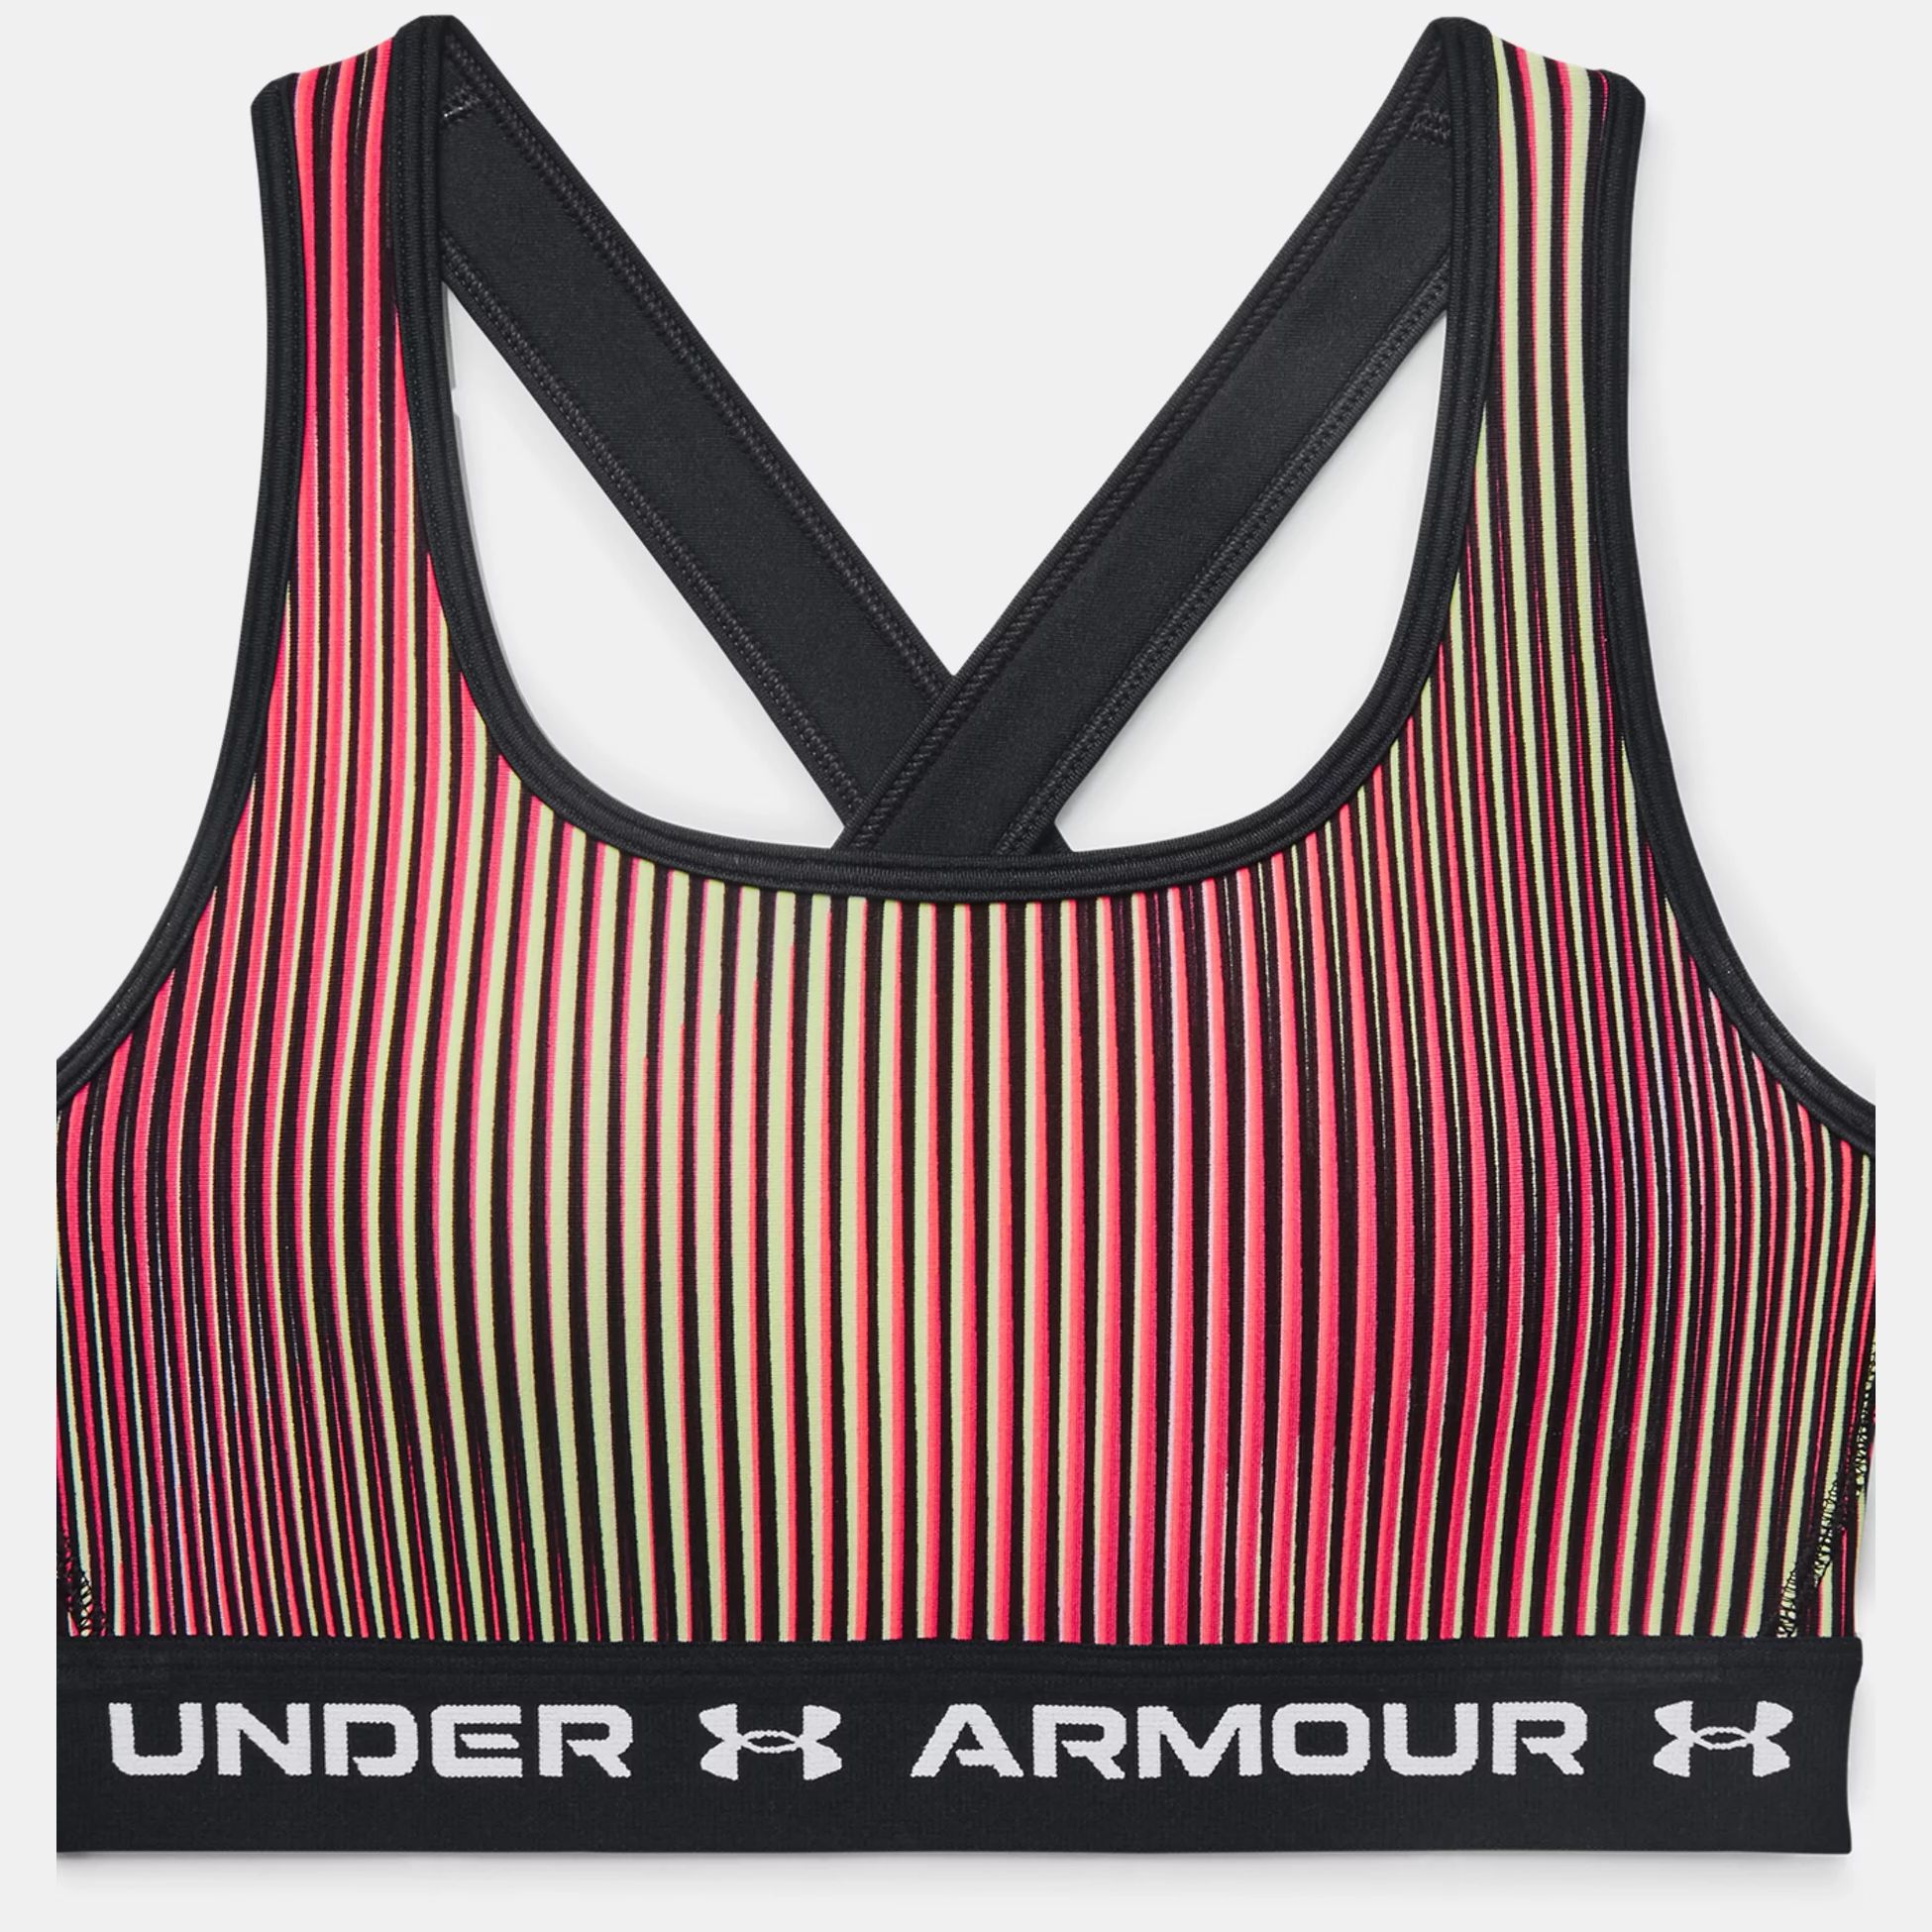 https://img1.sportconcept.com/backend_nou/content/images/-under-armourarmour-mid-crossback-printed-sports-bra-20210823173937.jpg